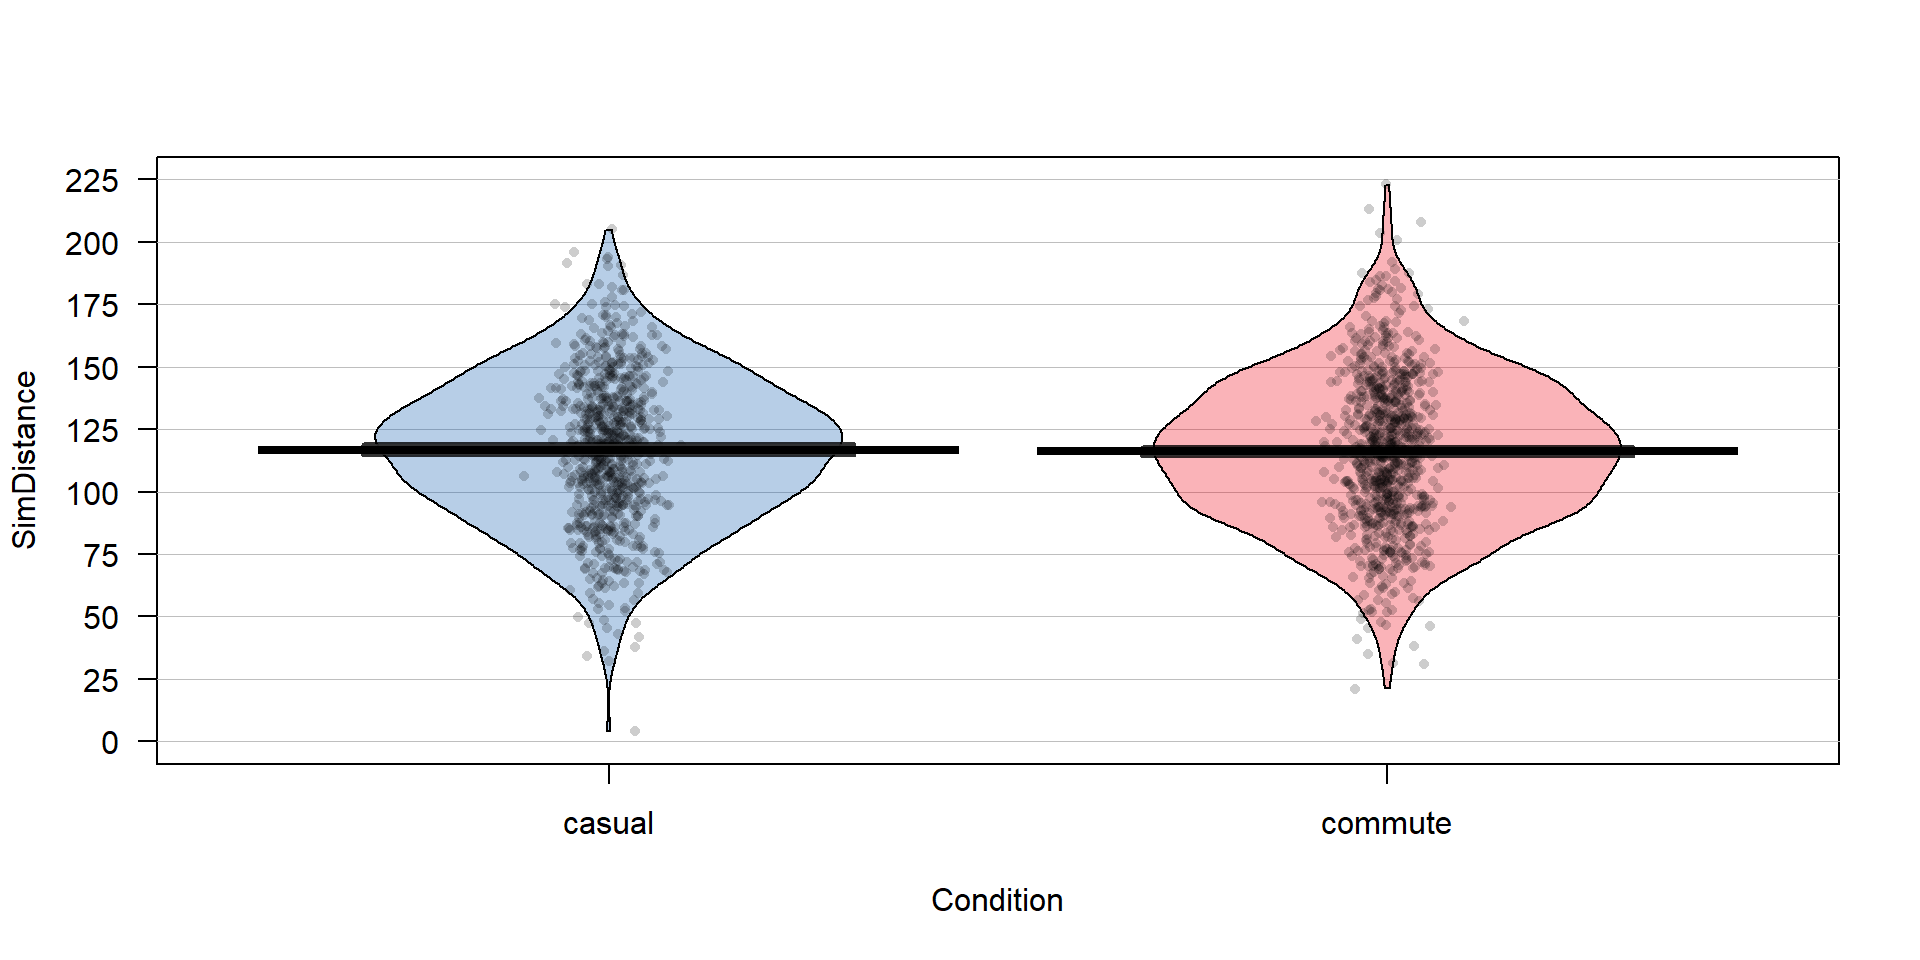 Pirate-plot of a simulated data set that assumes the same mean for both groups. The means in the two groups are very similar.